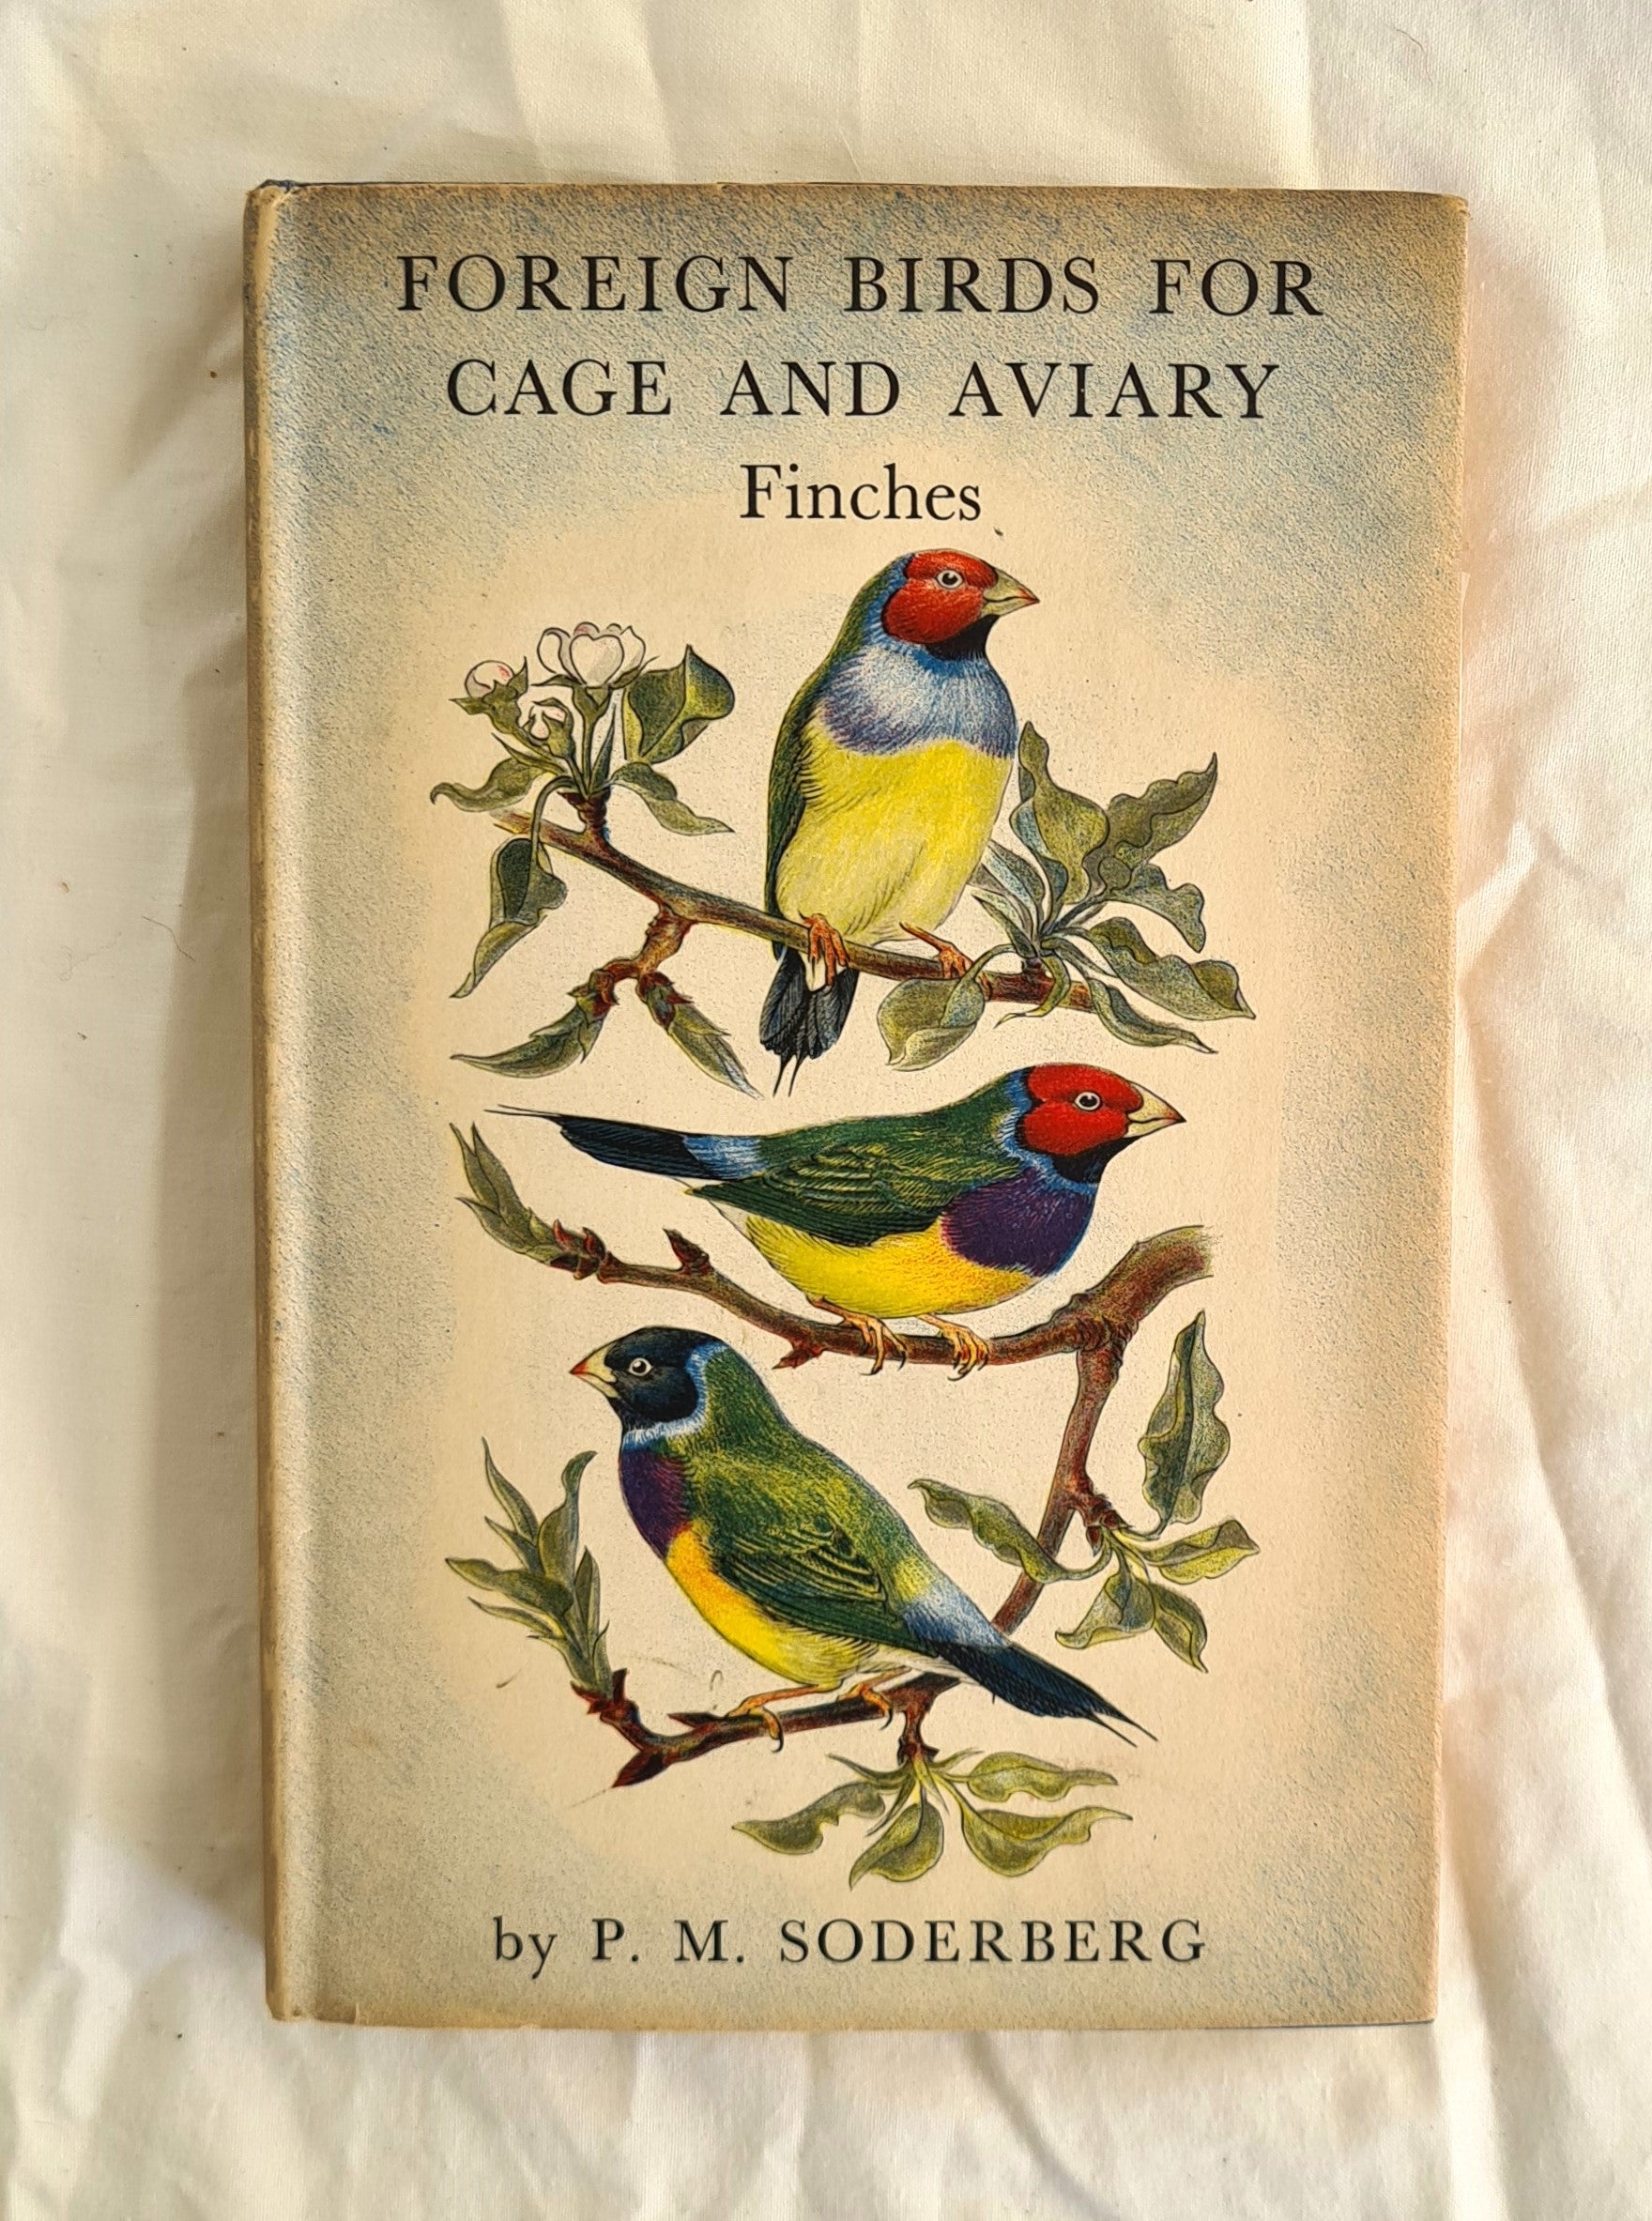 Foreign Birds for Cage and Aviary  Finches  by P. M. Soderberg  drawings by Sheila Dorrell